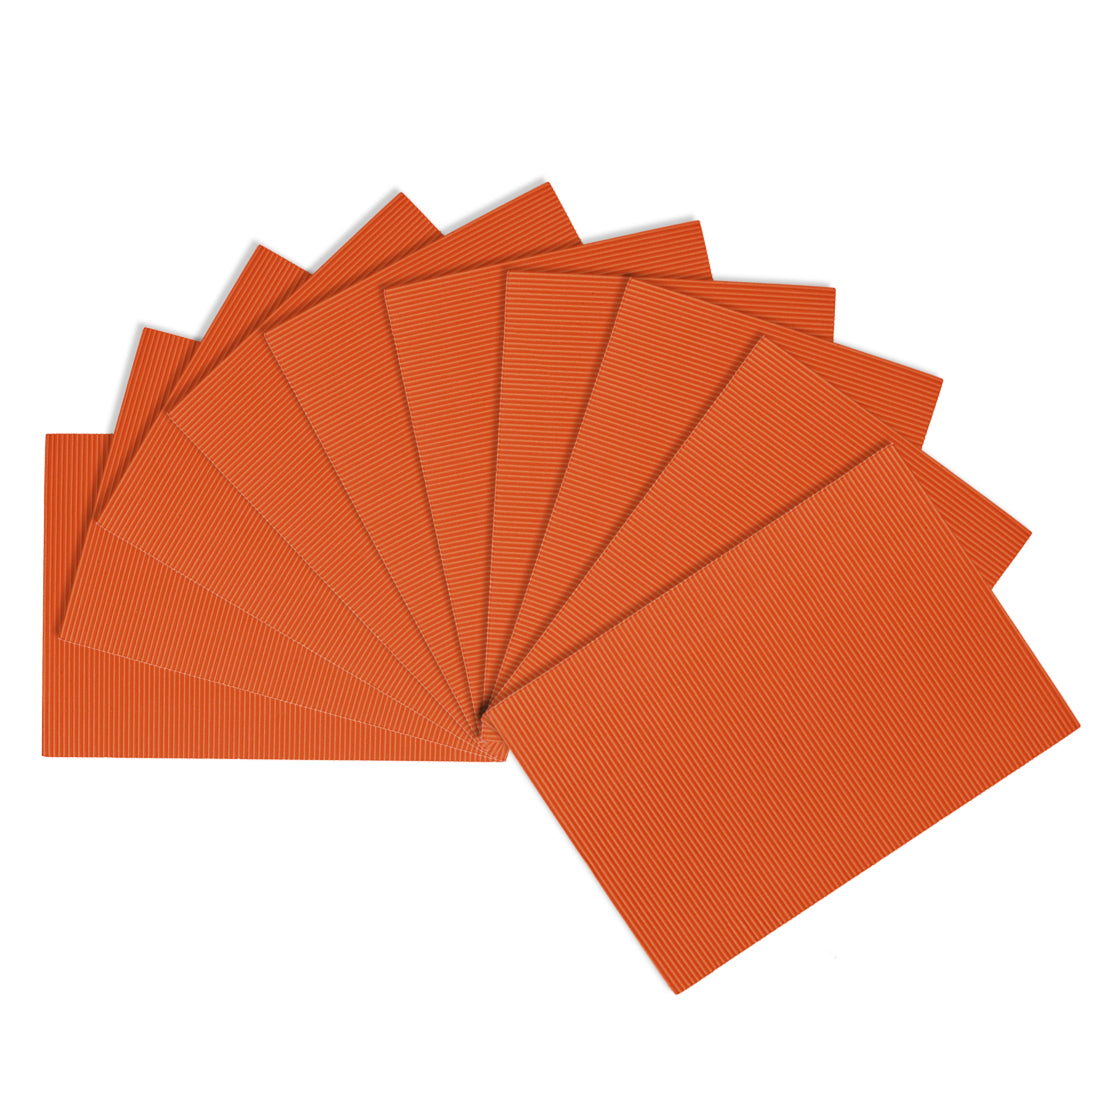 uxcell Uxcell 10pcs Corrugated Cardboard Paper Sheets,Orange,7.87-inch  x 11.94-inch